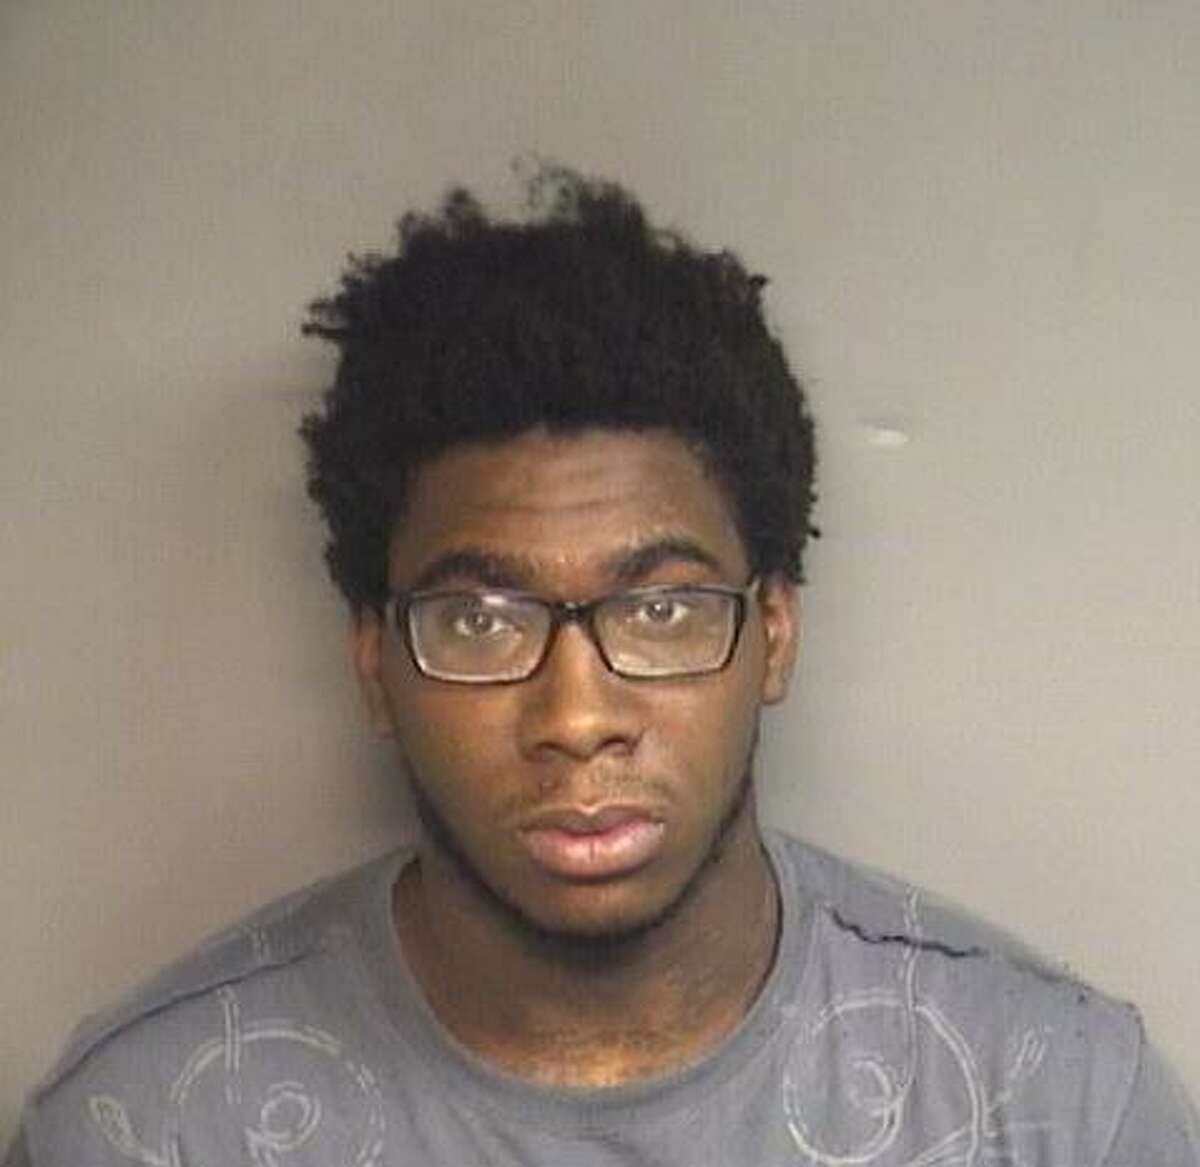 Isiah Whyte, 19, of Stamford, was charged with using a bat to smash the glass front door of Boost Mobile cell phone store on West Main Street early Wednesday morning.